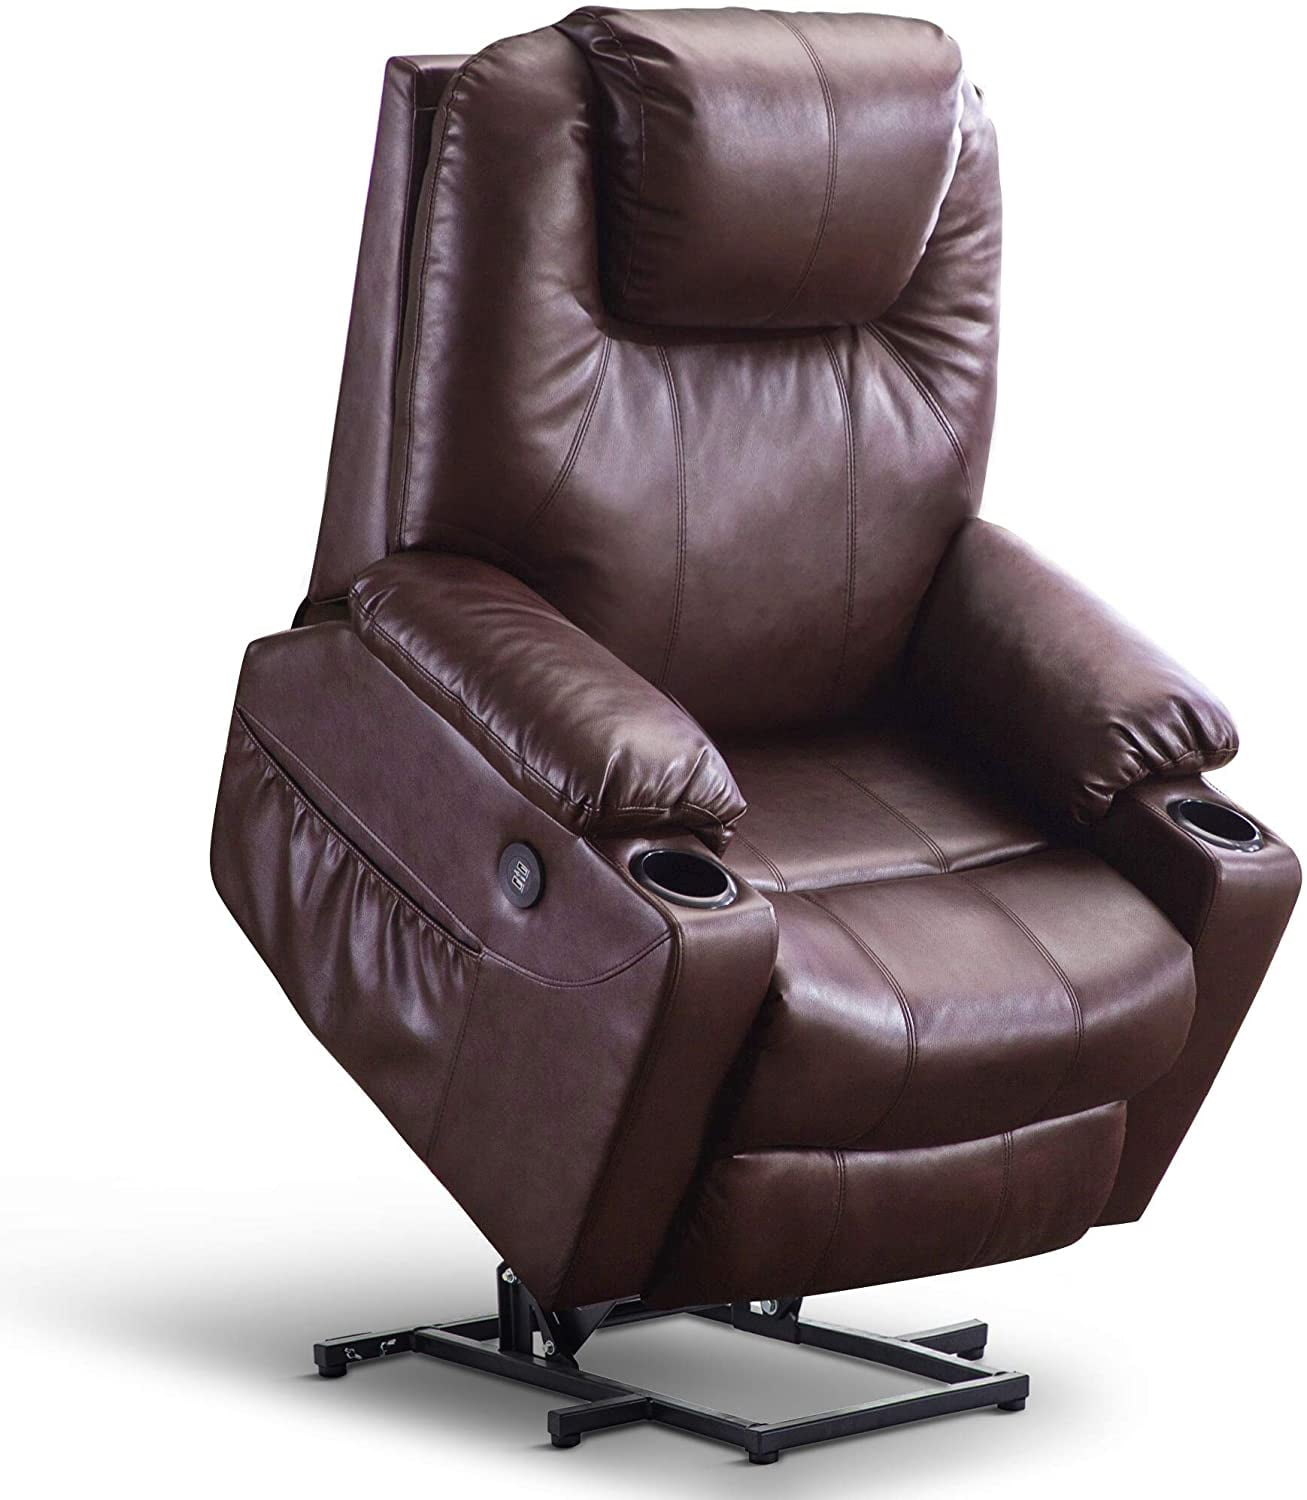 Mcombo Faux Leather Recliner Dark, Faux Leather Reclining Club Chair